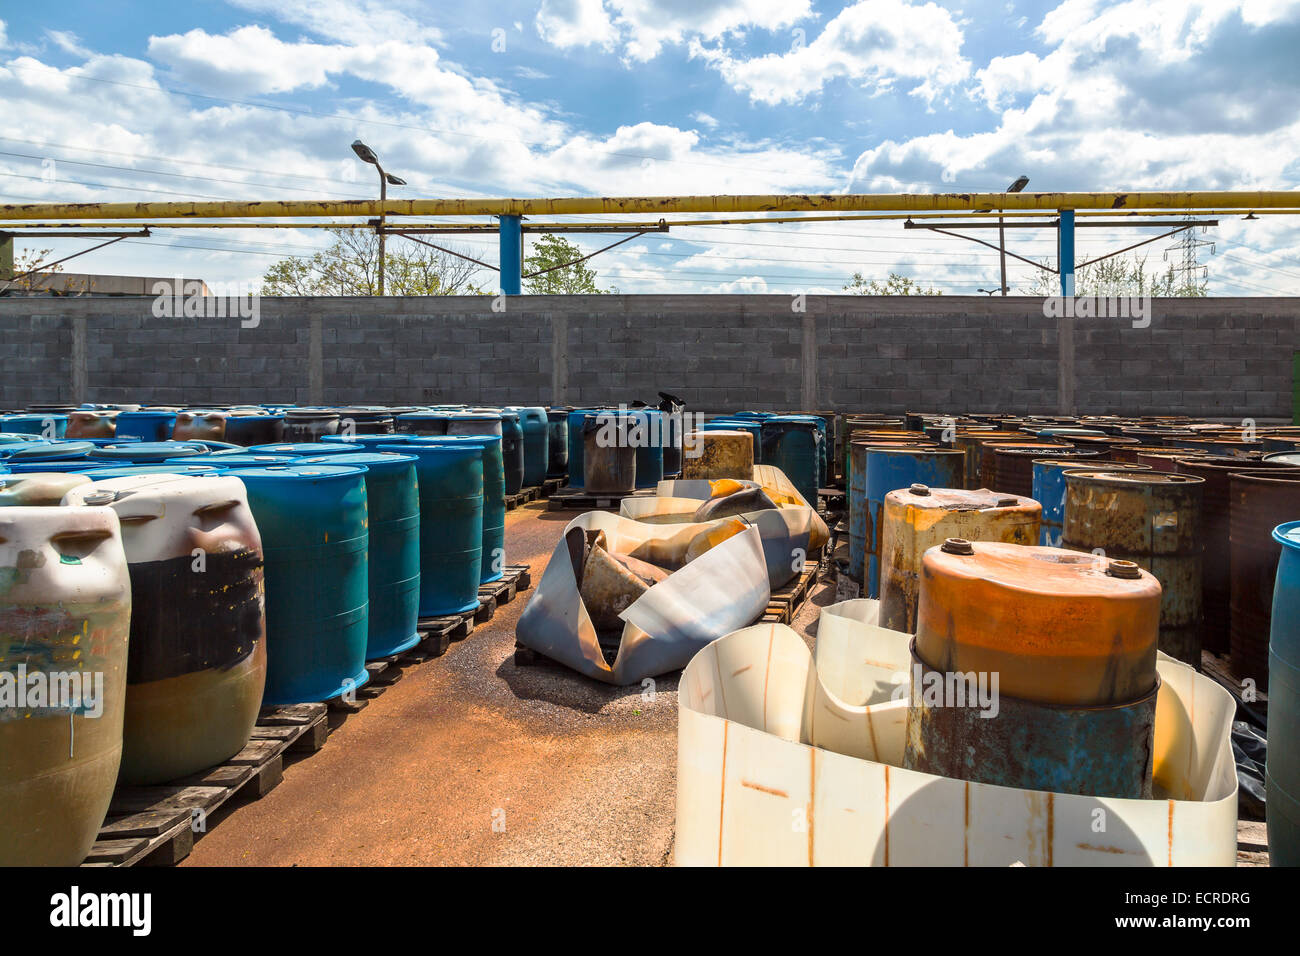 Several barrels of toxic waste at the dump Stock Photo